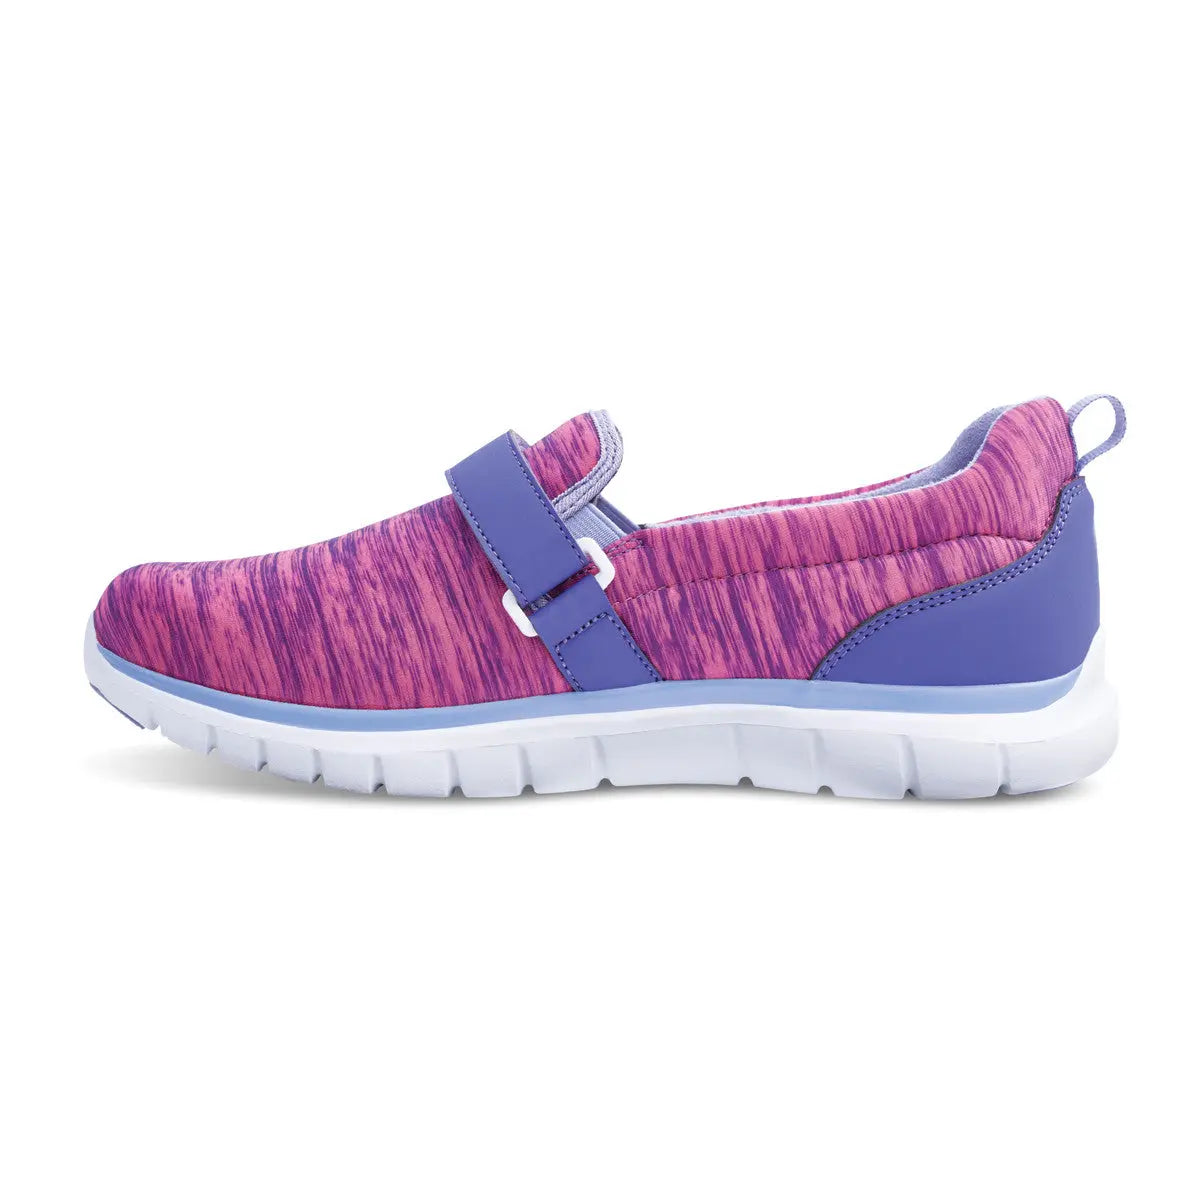 Anodyne Women's No.11 Sport Trainer in Purple/Pink with billing code A5500